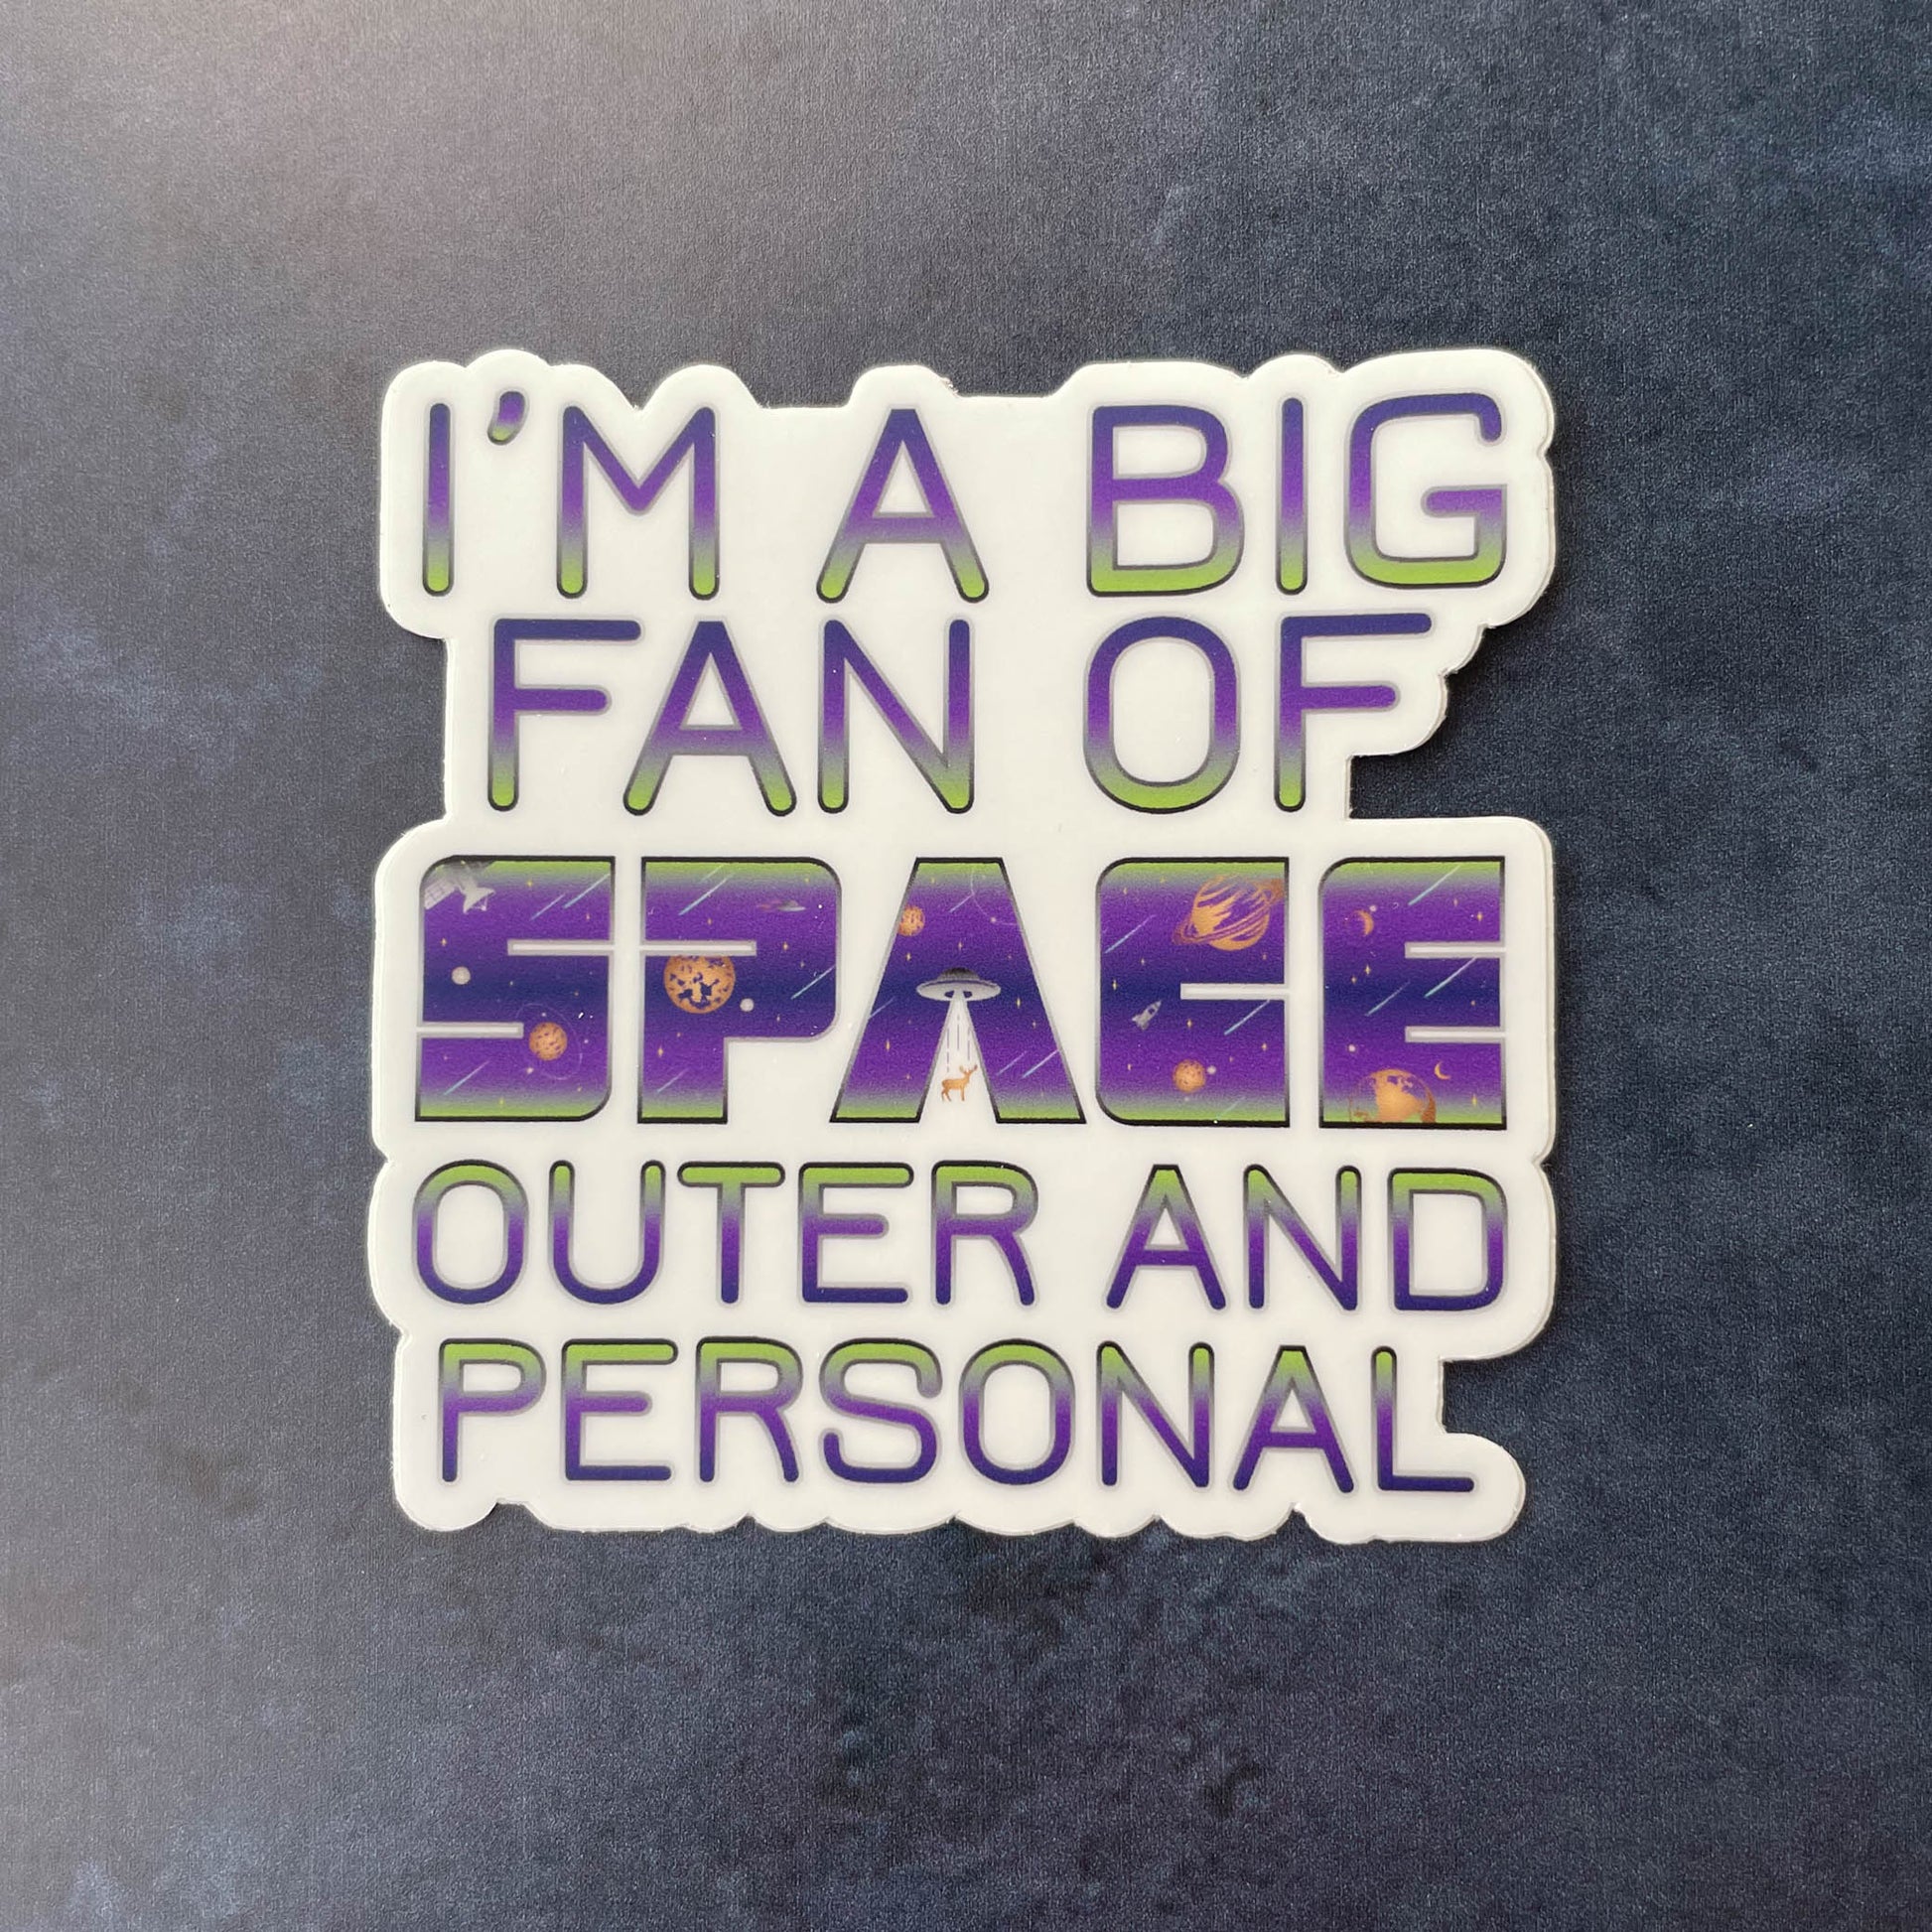 Big Fan of Space - Outer and Personal 3" Sticker on dark blue background